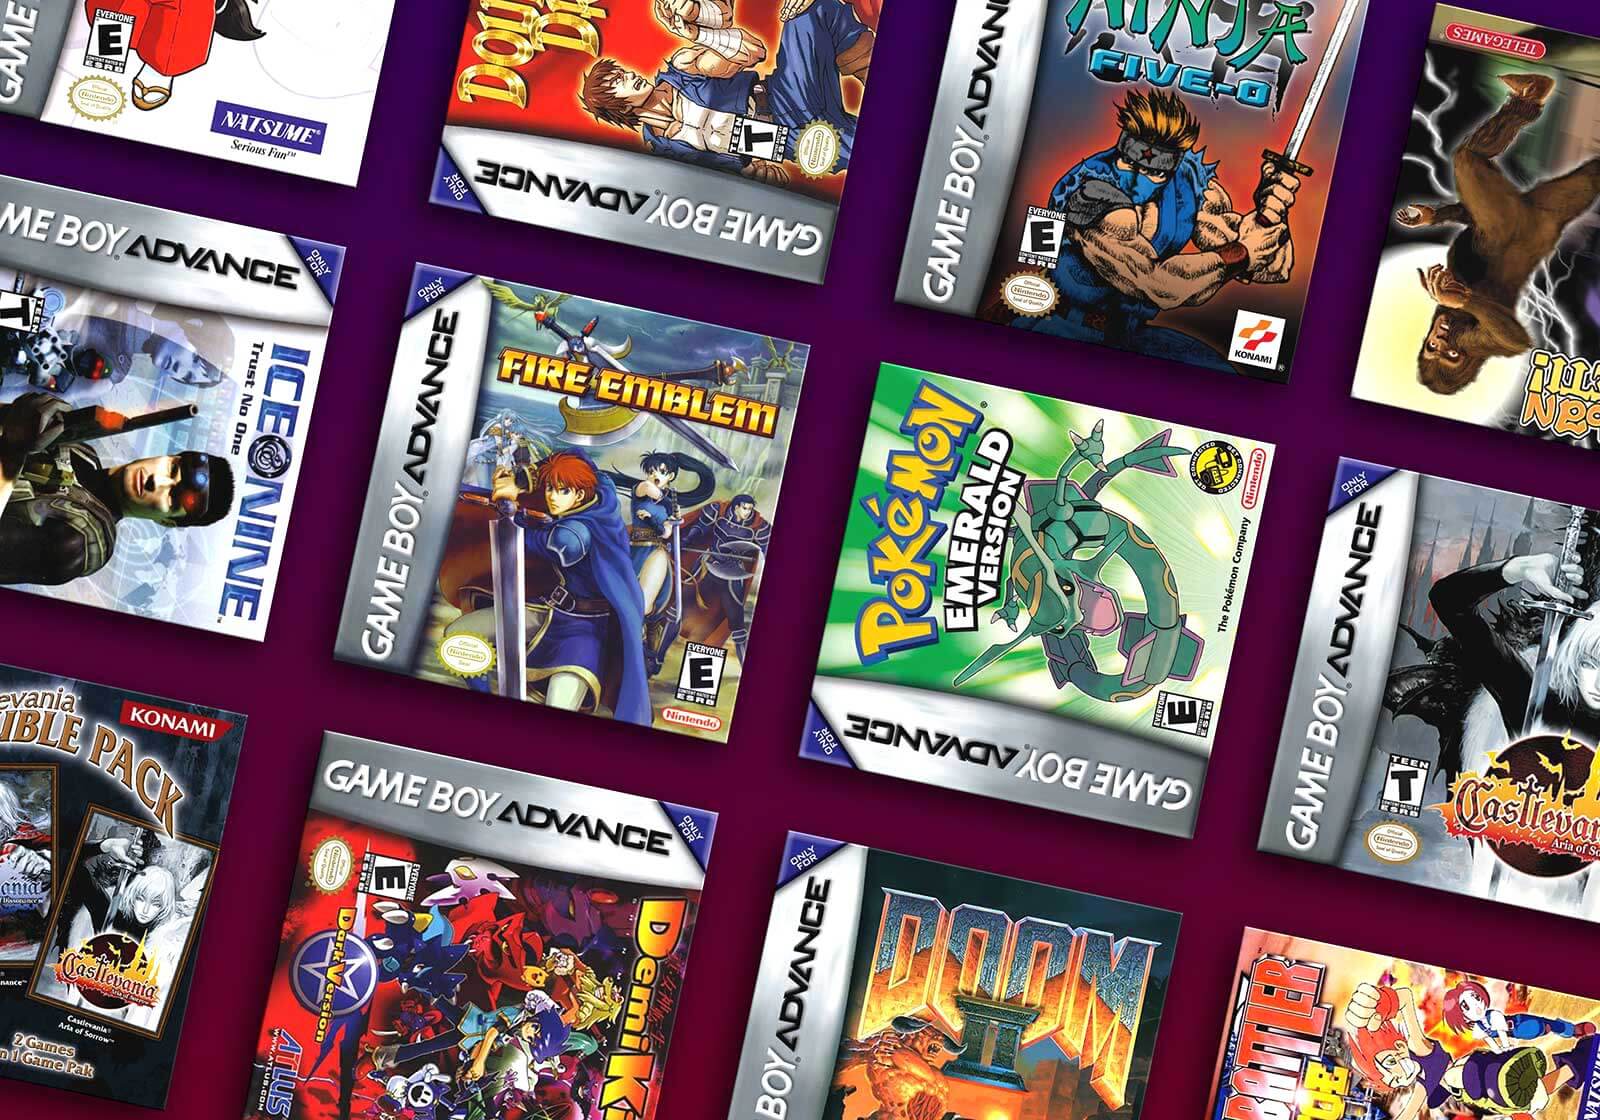 Download [No-Intro] Nintendo - GBA (Game Boy Advance) ROMs Pack